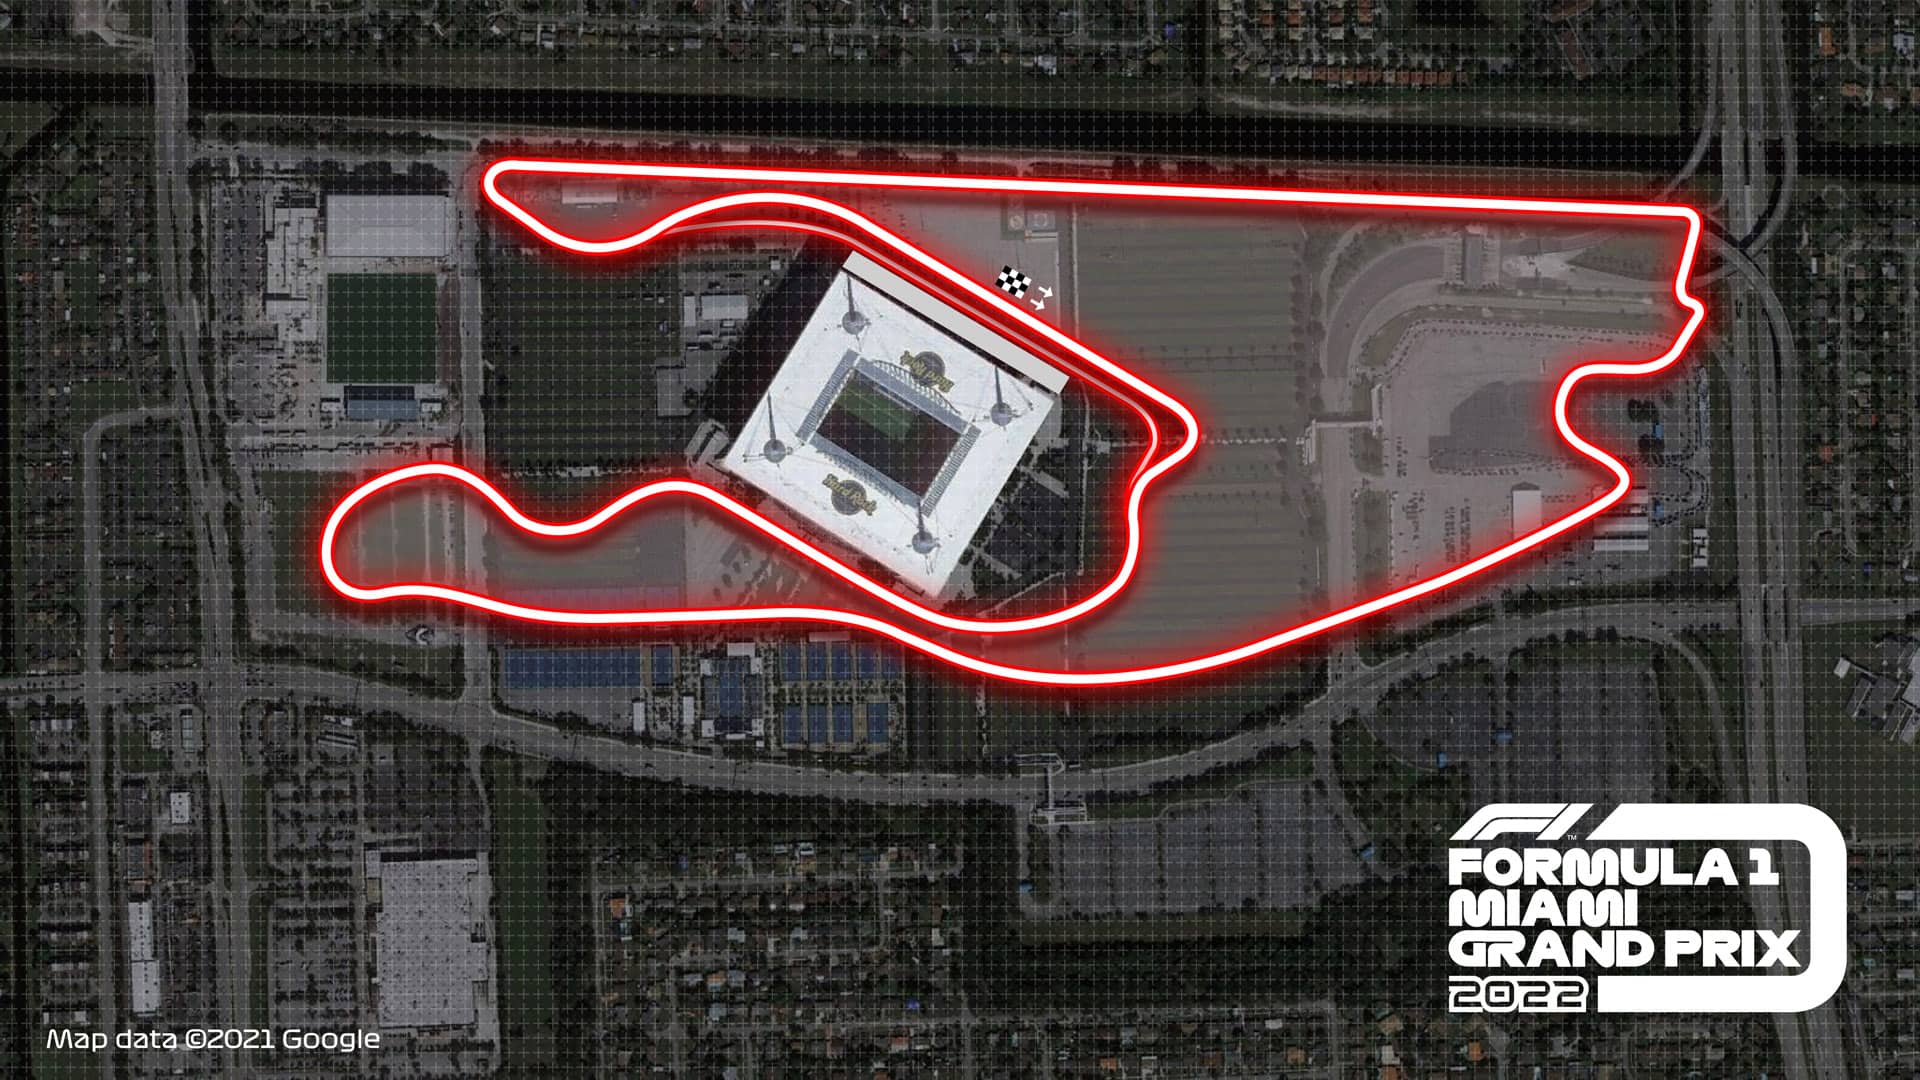 Miami Grand Prix to join F1 calendar in 2022, with exciting new circuit